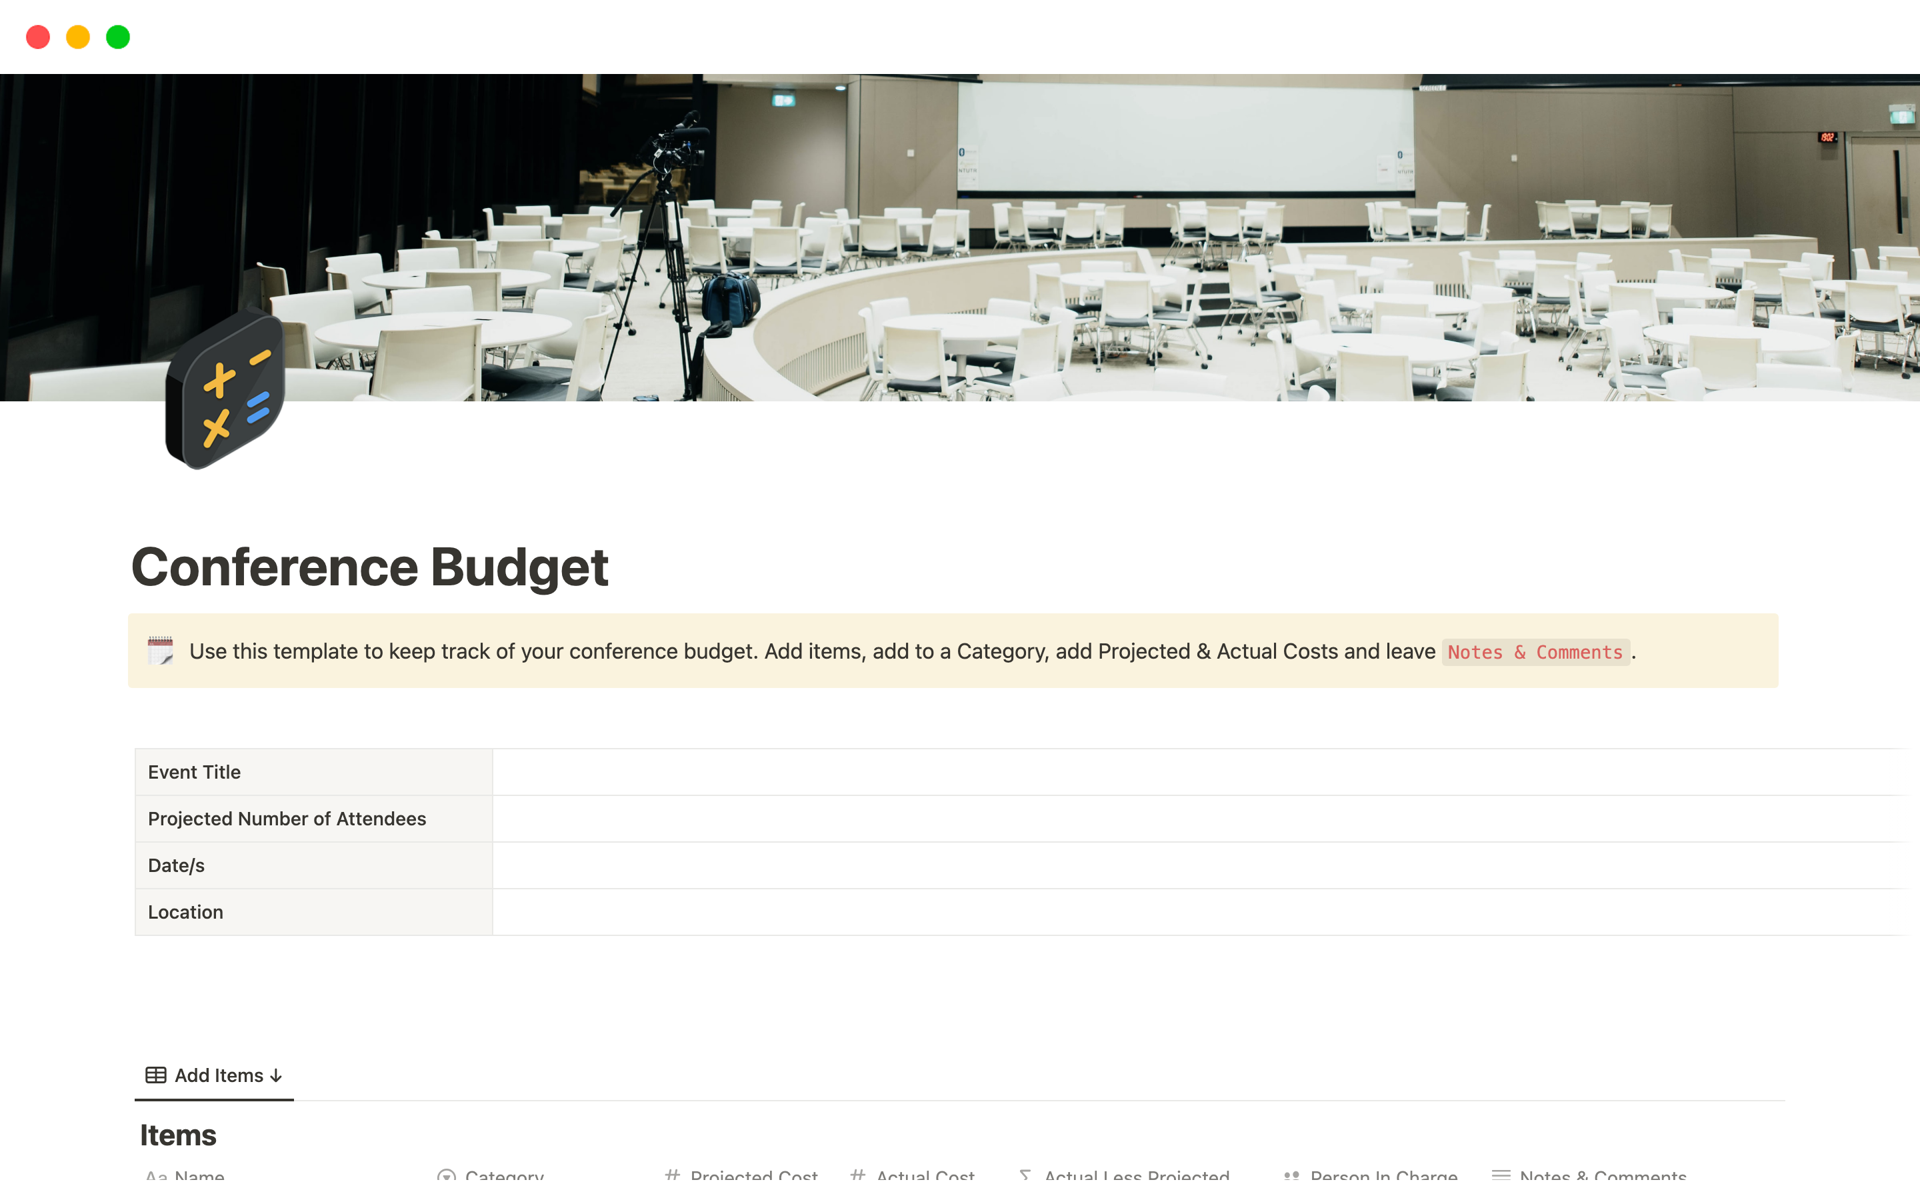 Use this template to keep track of your conference budget.